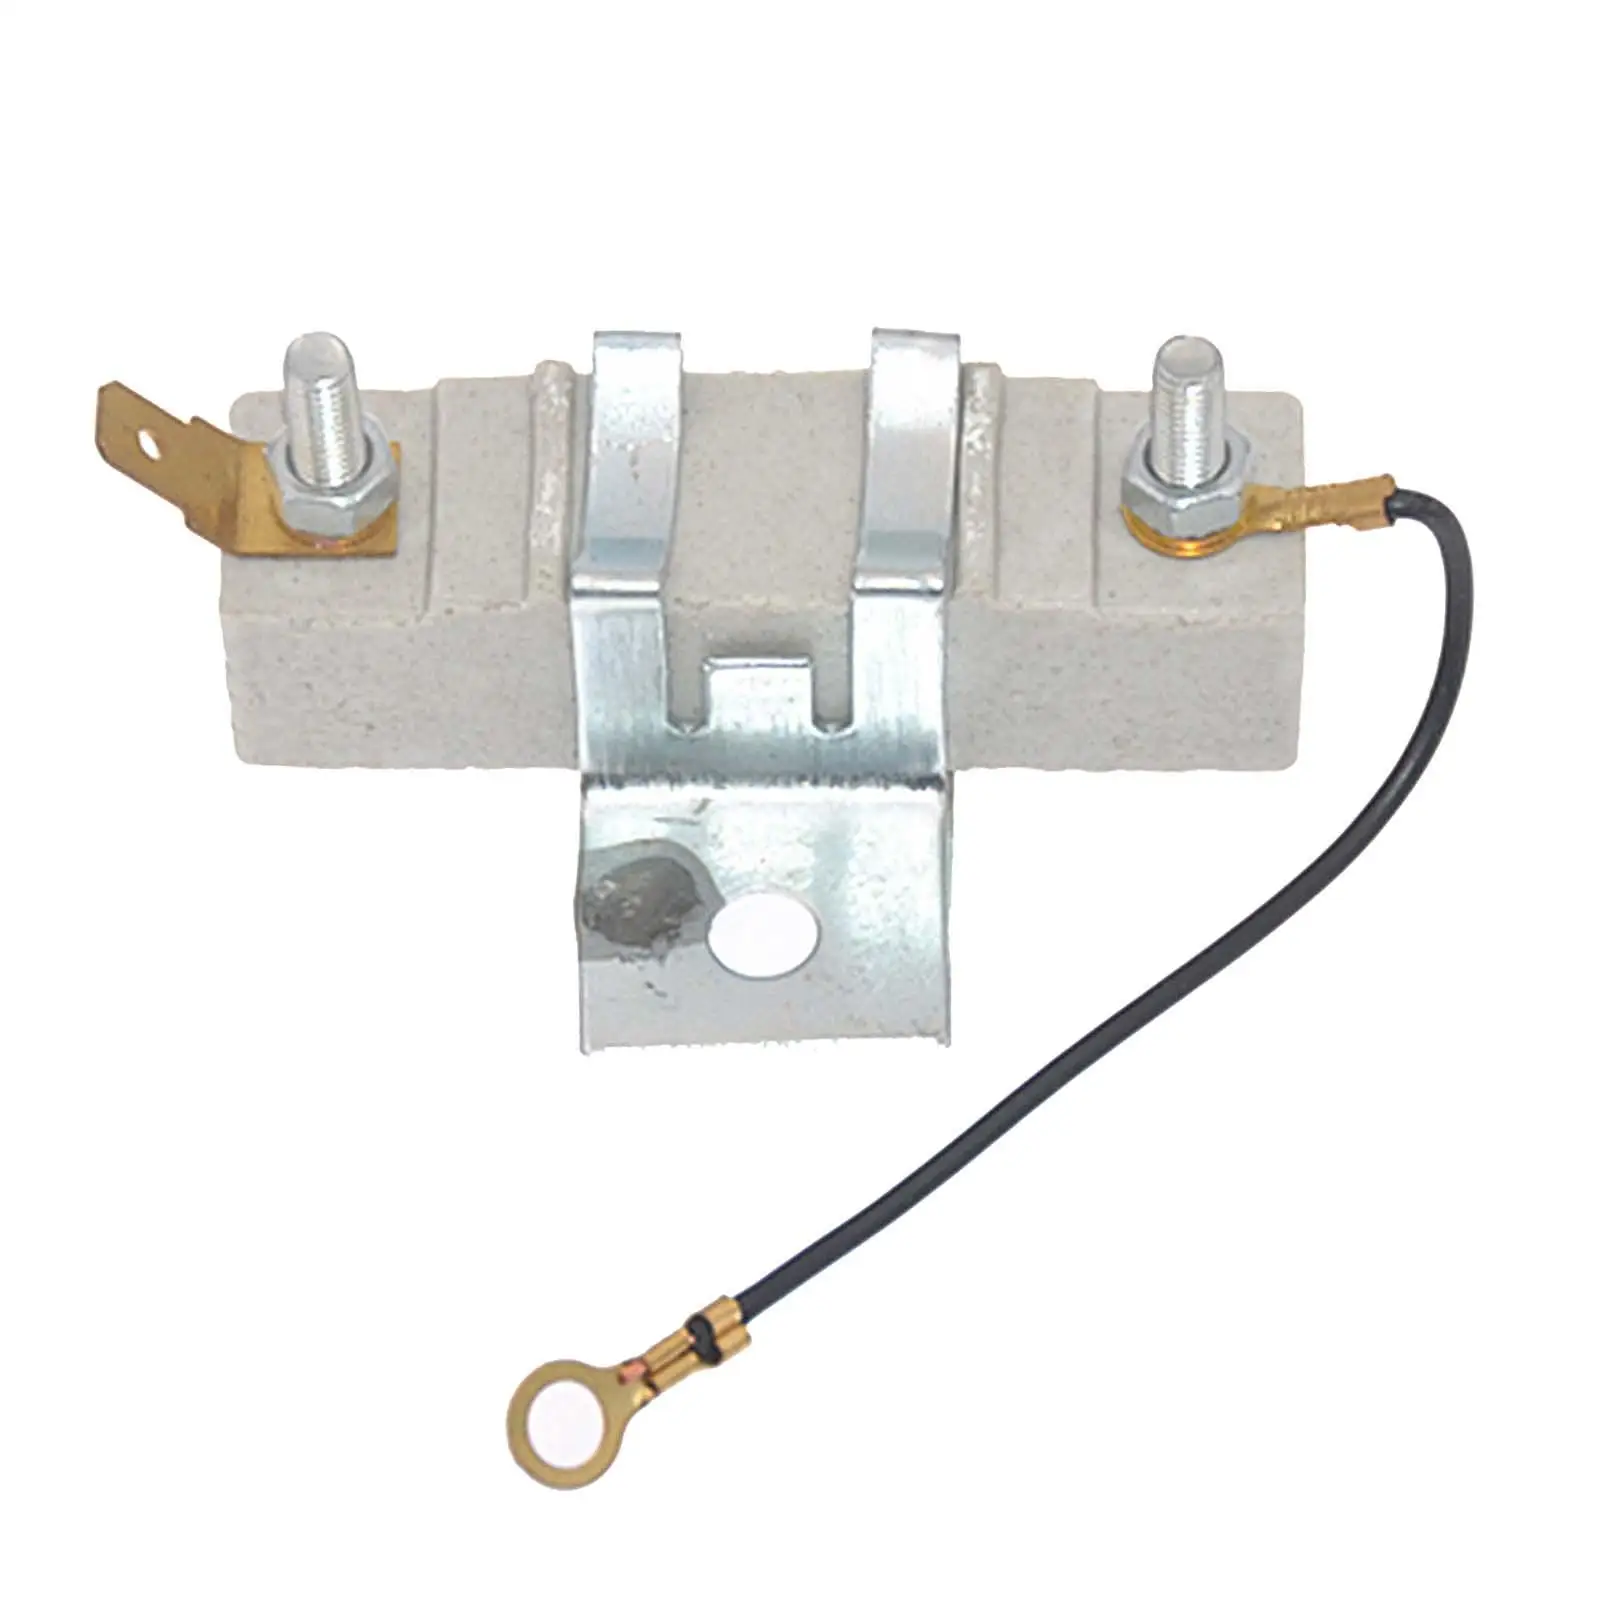 Ignition Coil External Ballast Resistor Premium for 1.5 Ohm Classic Car late 1960S-Mid 1980S